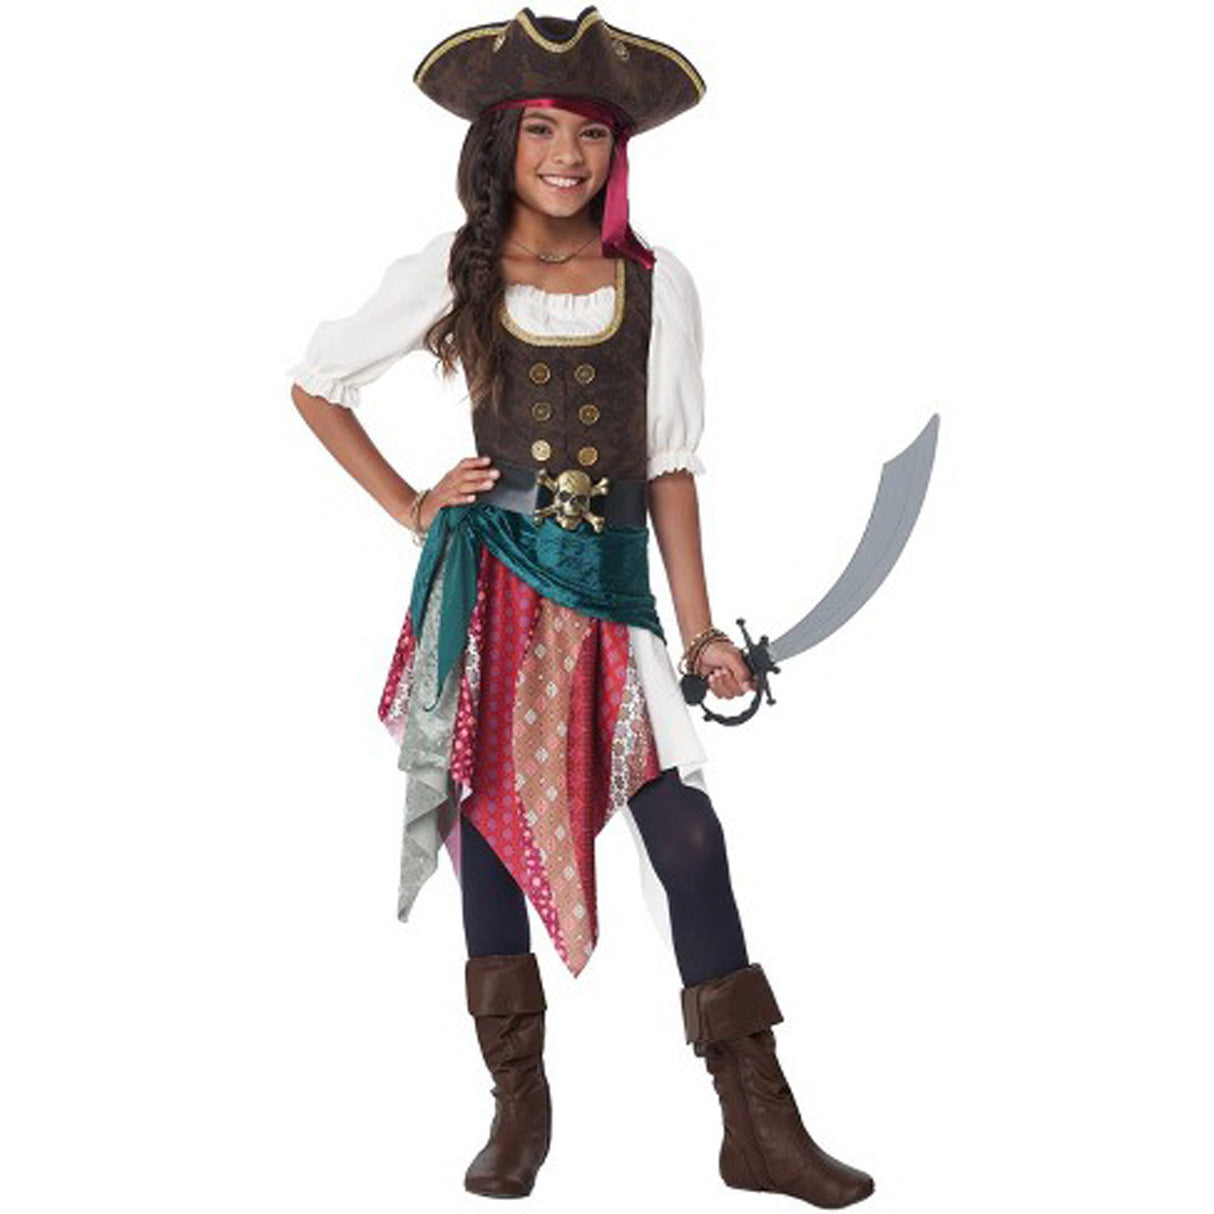 CALIFORNIA COSTUMES Costumes Boho Pirate Costume for Kids, Blue and Red Dress With Vest